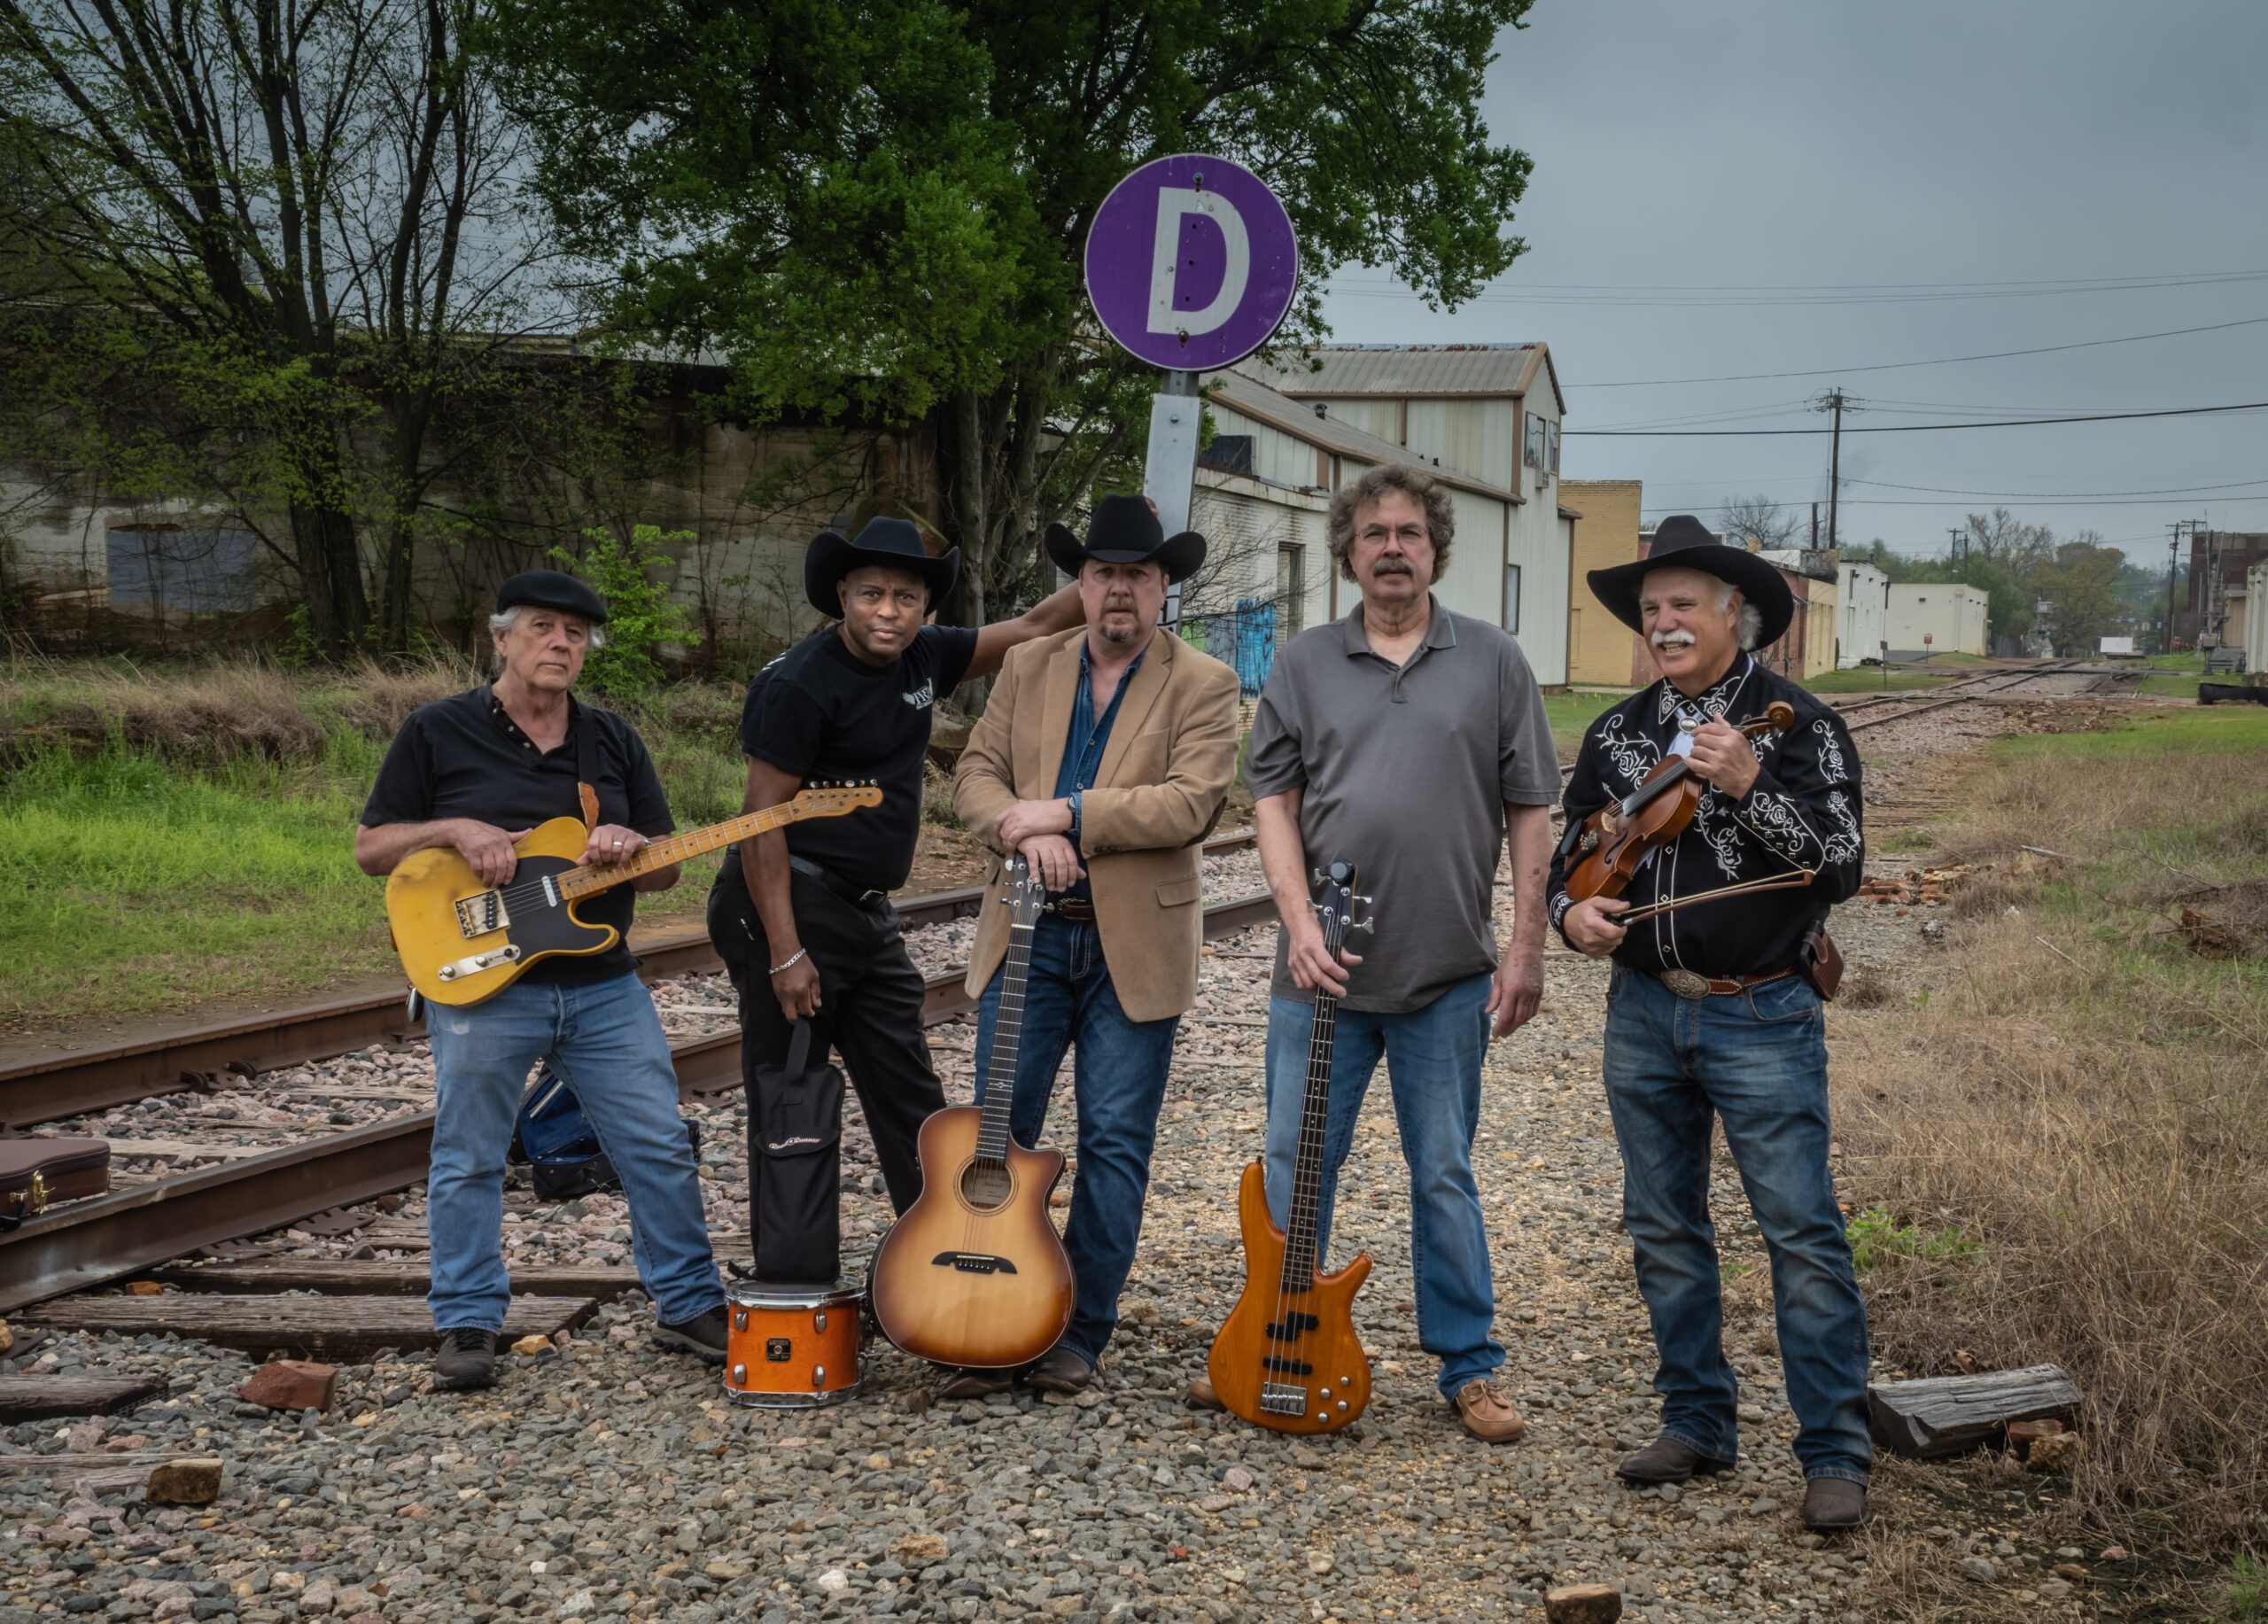 The Frio River Band – East Texas’ Premier Country Band